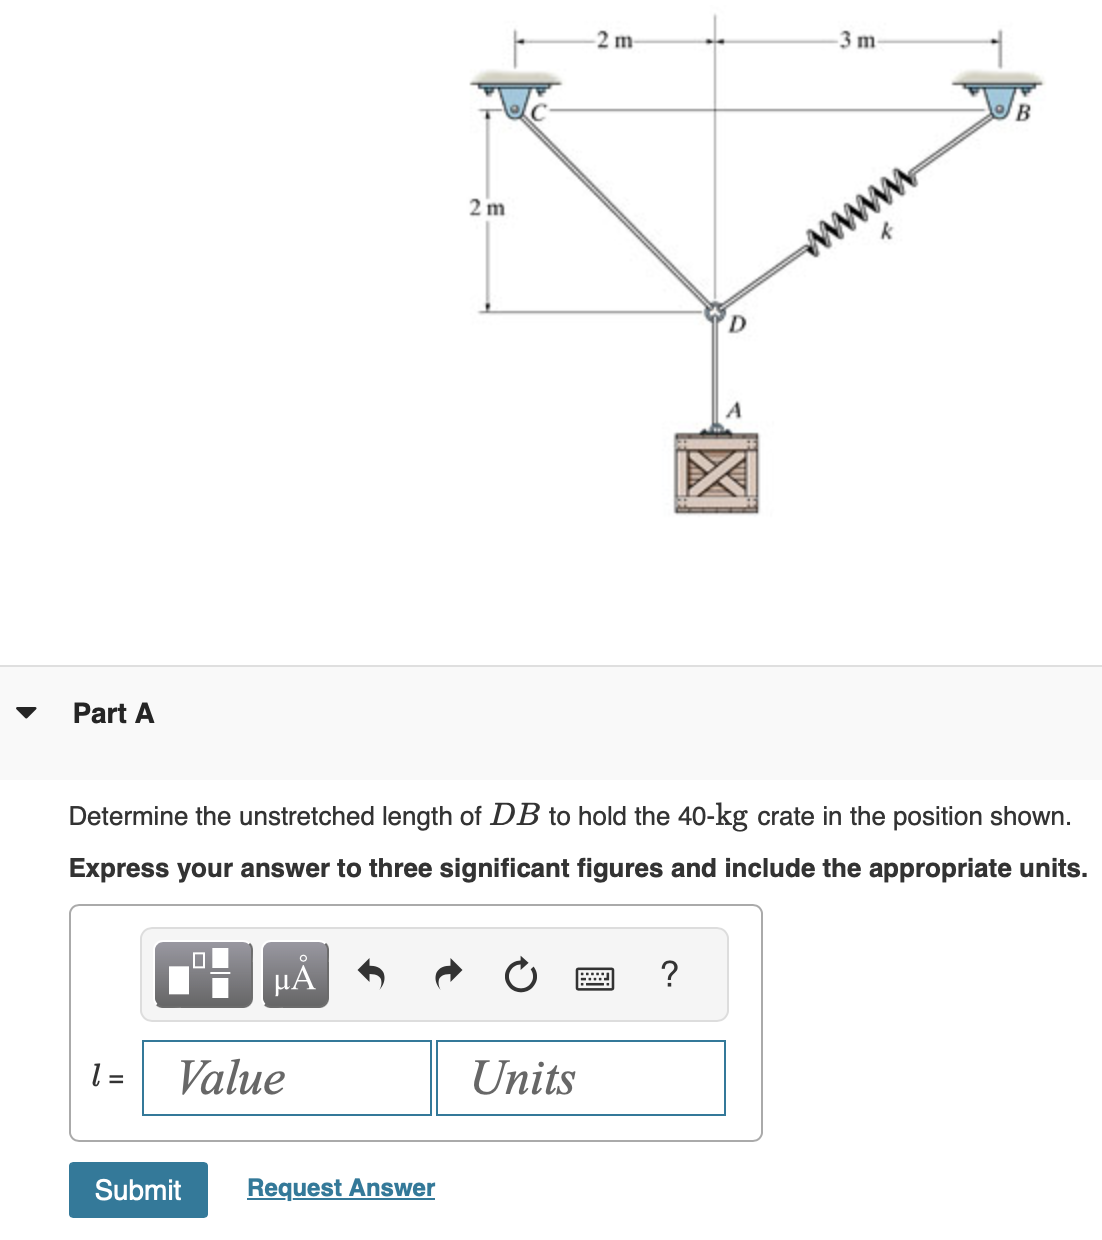 Part A
HÅ
1 = Value
Submit
Determine the unstretched length of DB to hold the 40-kg crate in the position shown.
Express your answer to three significant figures and include the appropriate units.
2 m
Request Answer
2 m-
Units
=
-3 m-
?